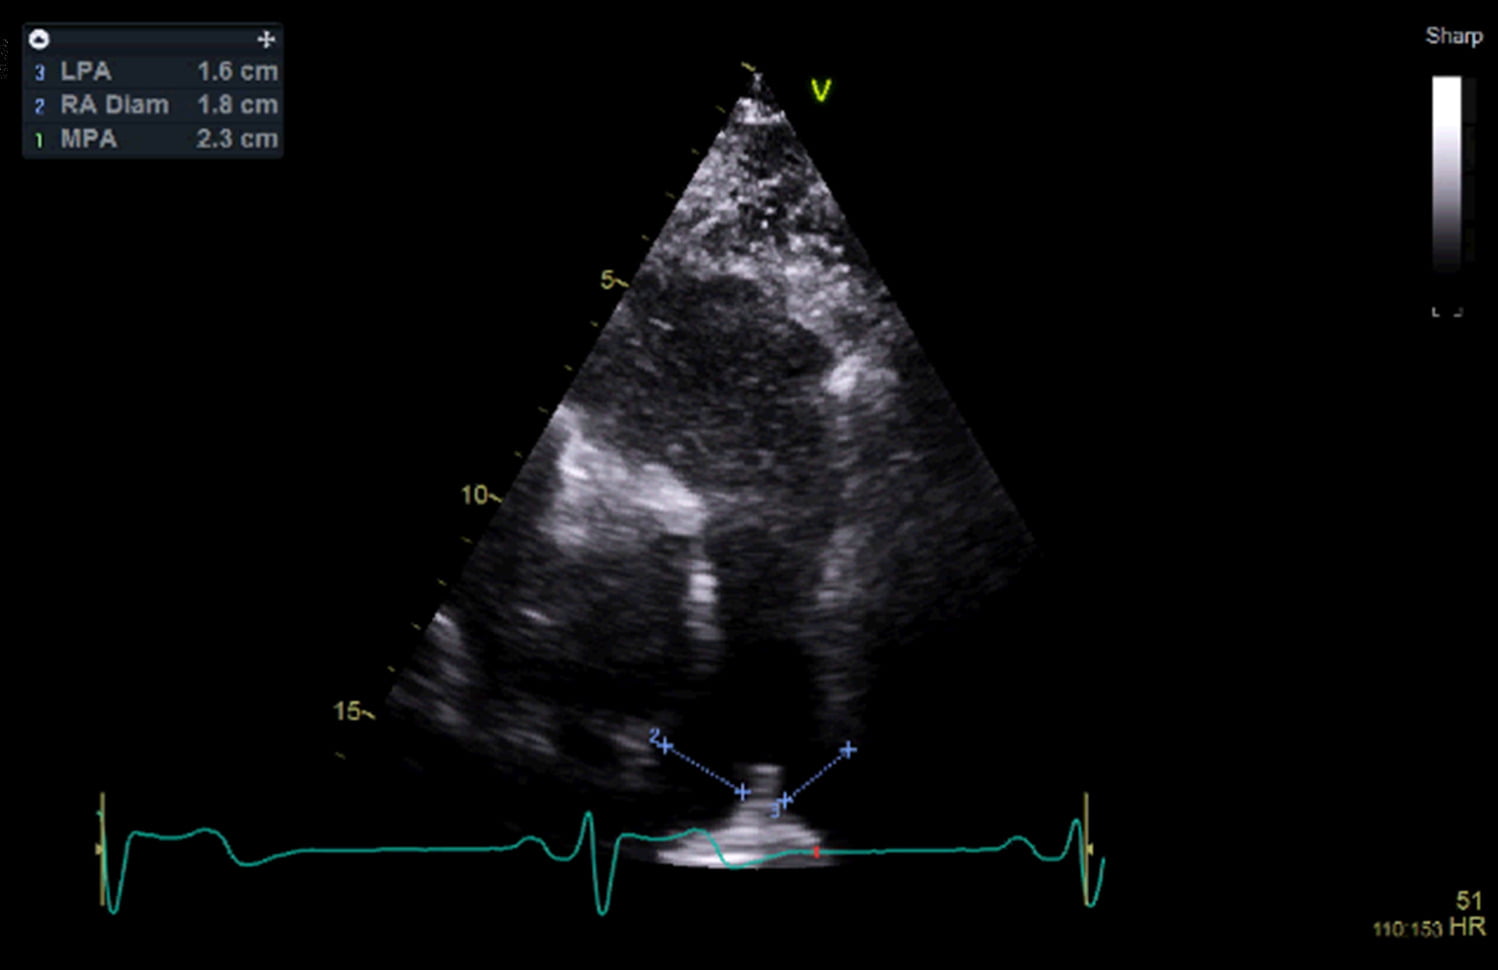 echocardiogram showing the pulmonary artery of the heart